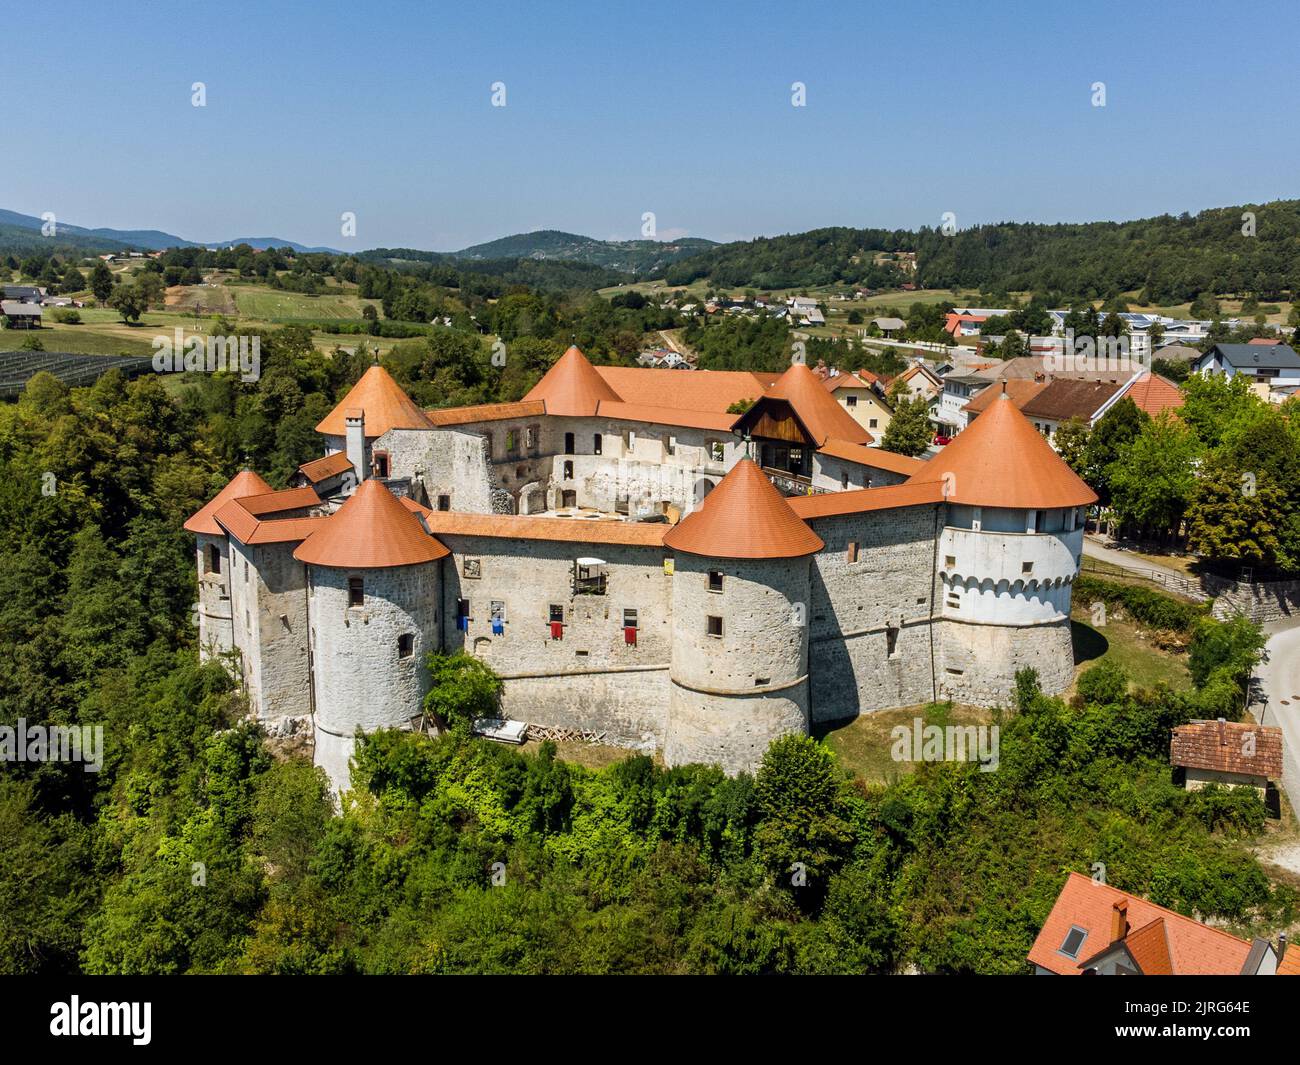 Aerial drone view of Medieval castle of Zuzemberk or Seisenburg or Sosenberch, positioned on terrace above the Krka River Canyon, Central Slovenia. Stock Photo